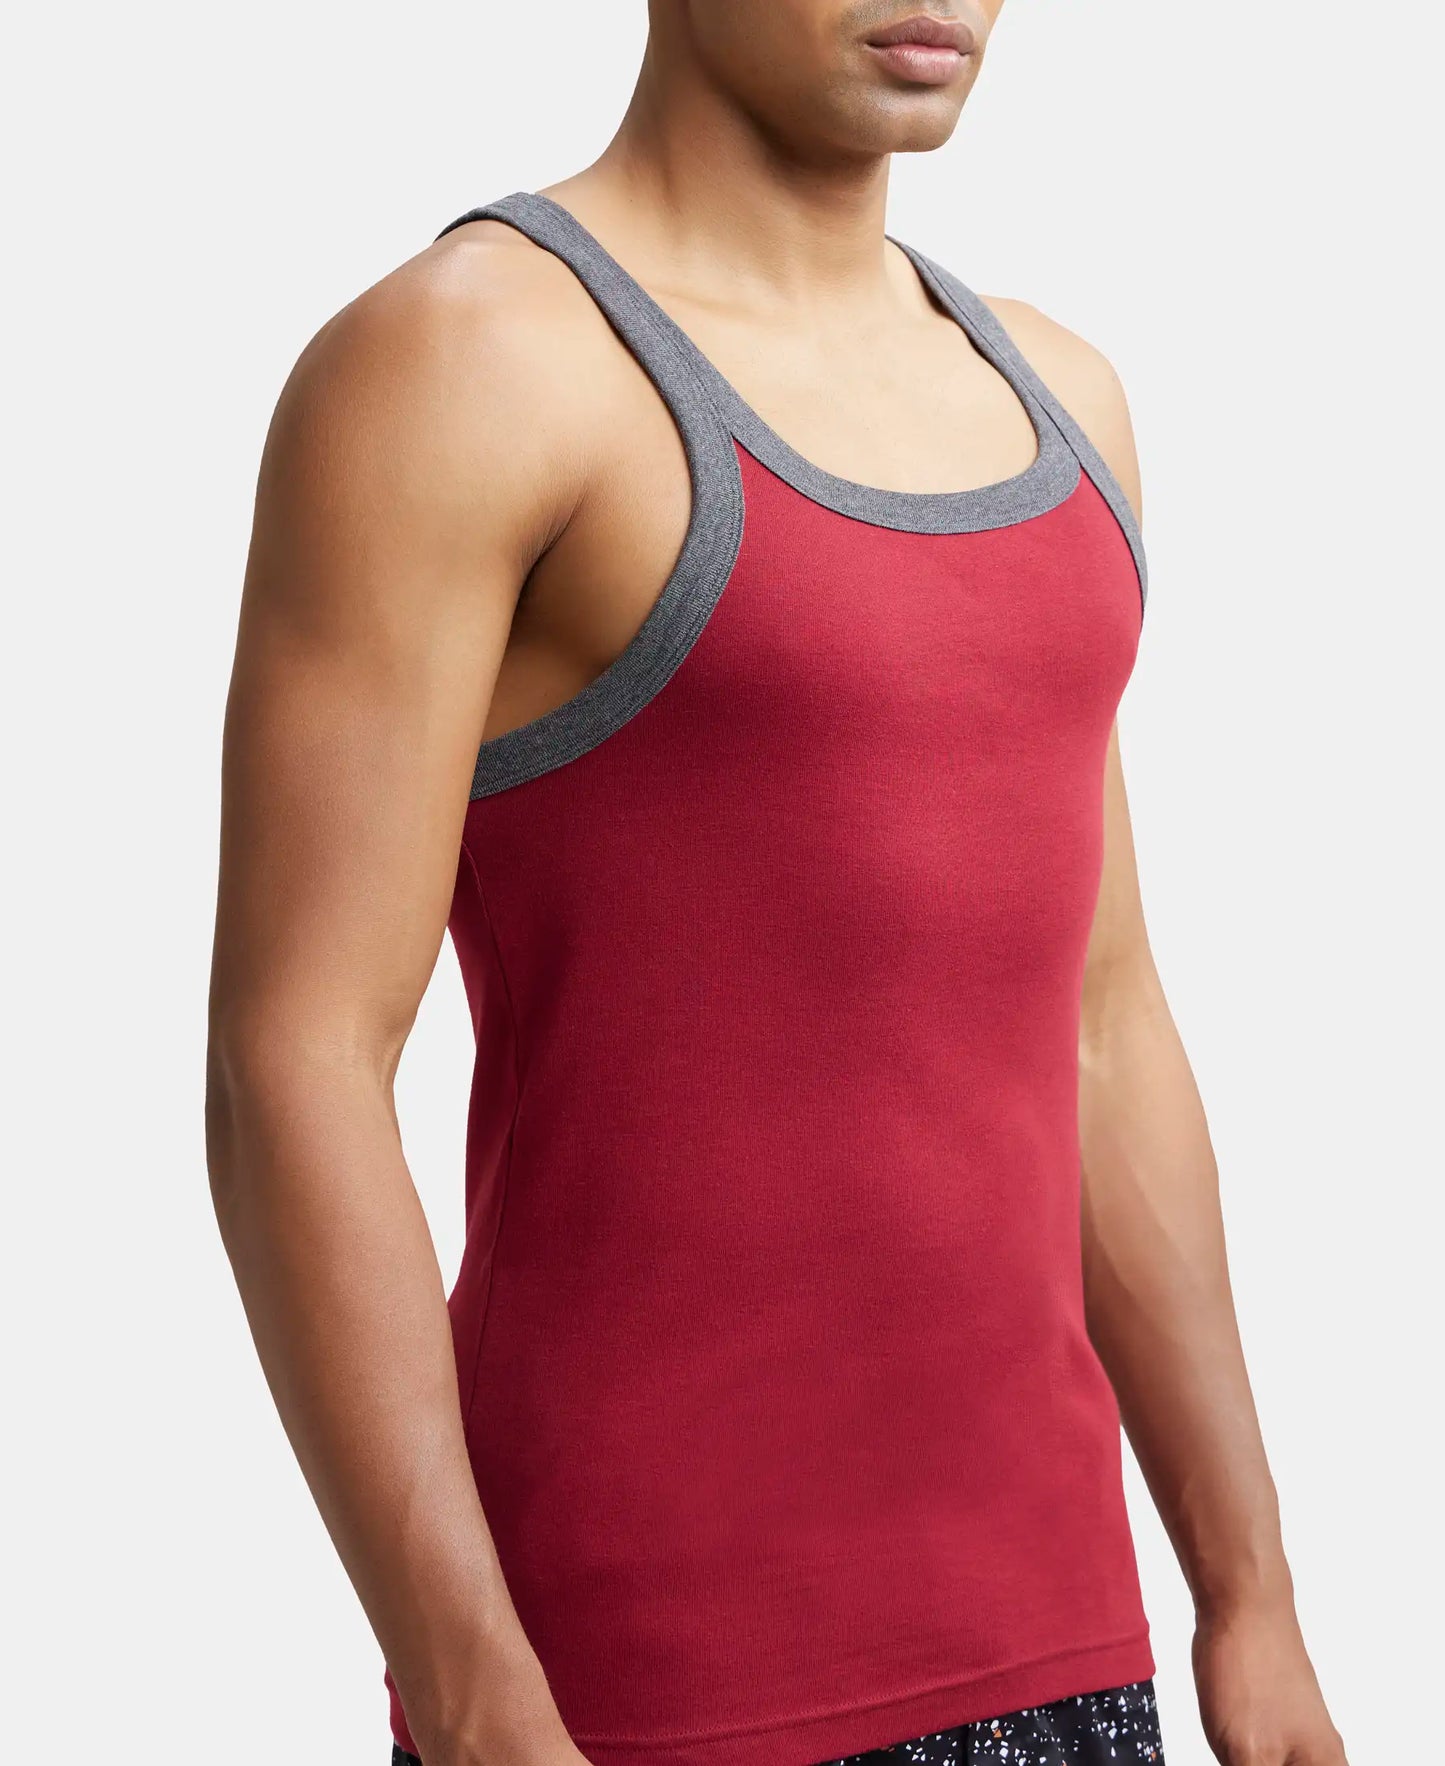 Super Combed Cotton Rib Square Neck Gym Vest - Red Pepper with Assorted Bias-6